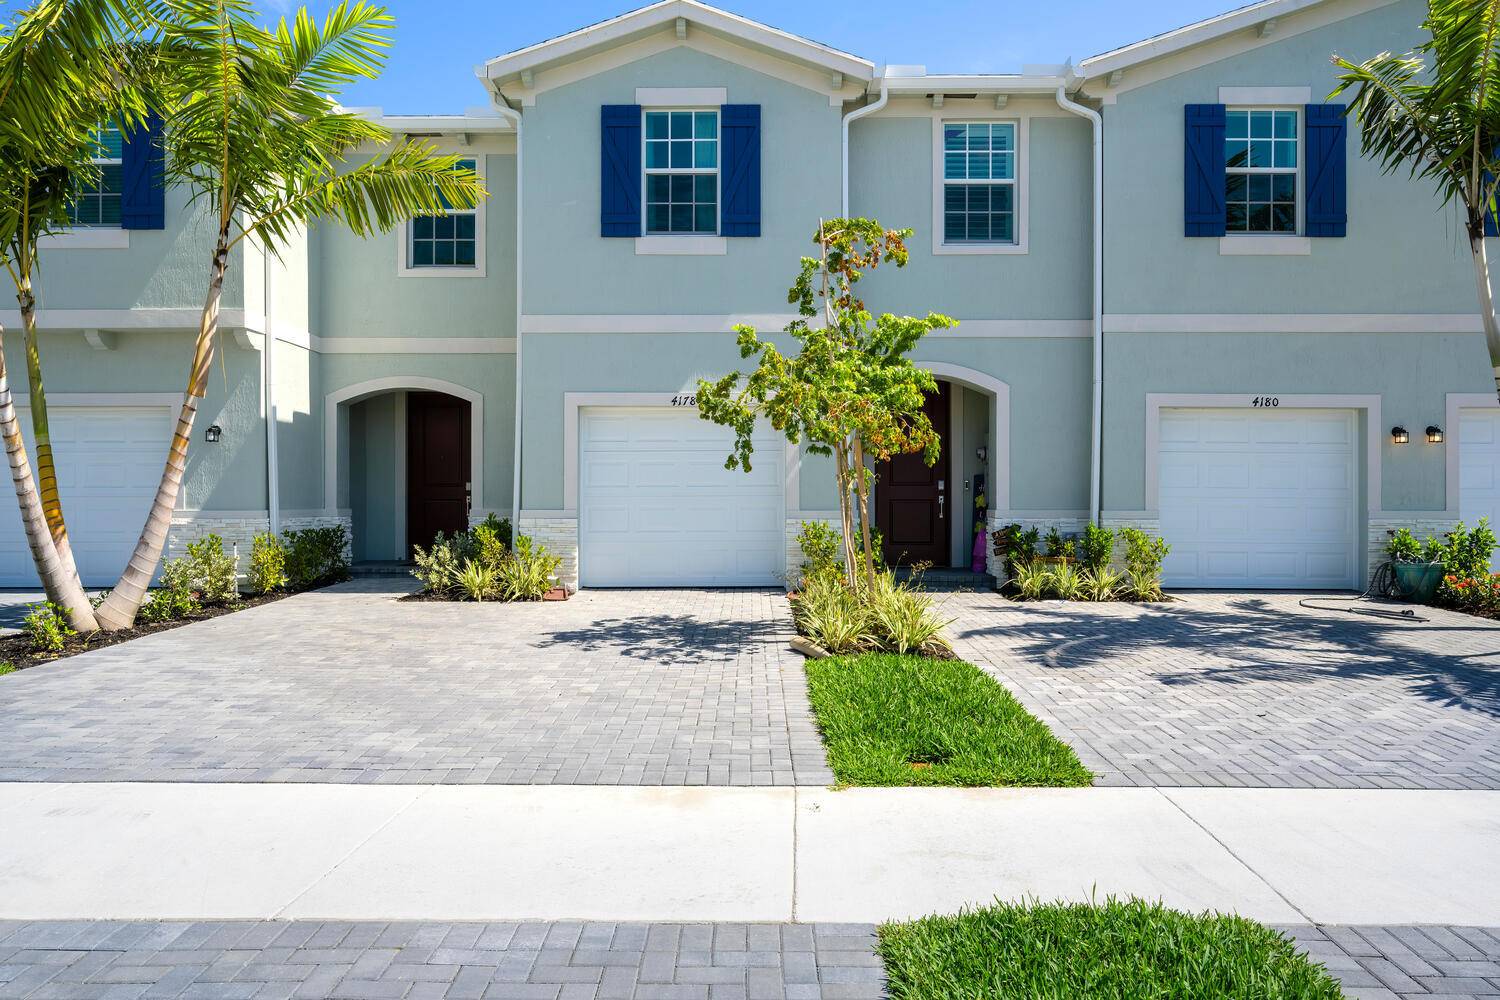 Newly Constructed Townhome in the West Part of Lake Worth, beautiful well kept gate community, close to everything, easy access to Turnpike and everything else.